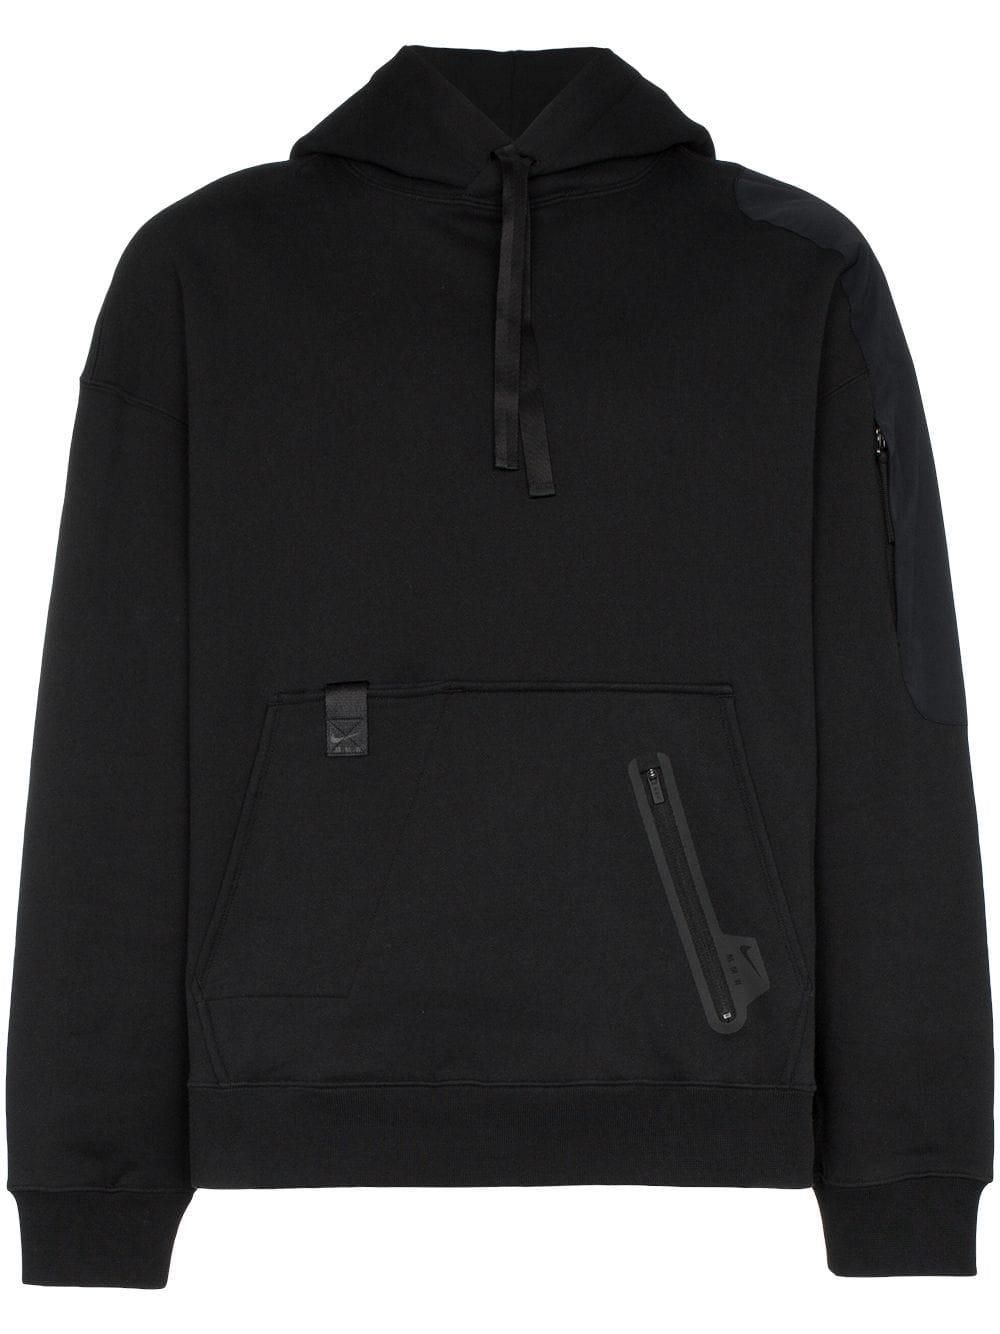 Nike Cotton X Mmw Pullover Hoodie in Black for Men - Lyst